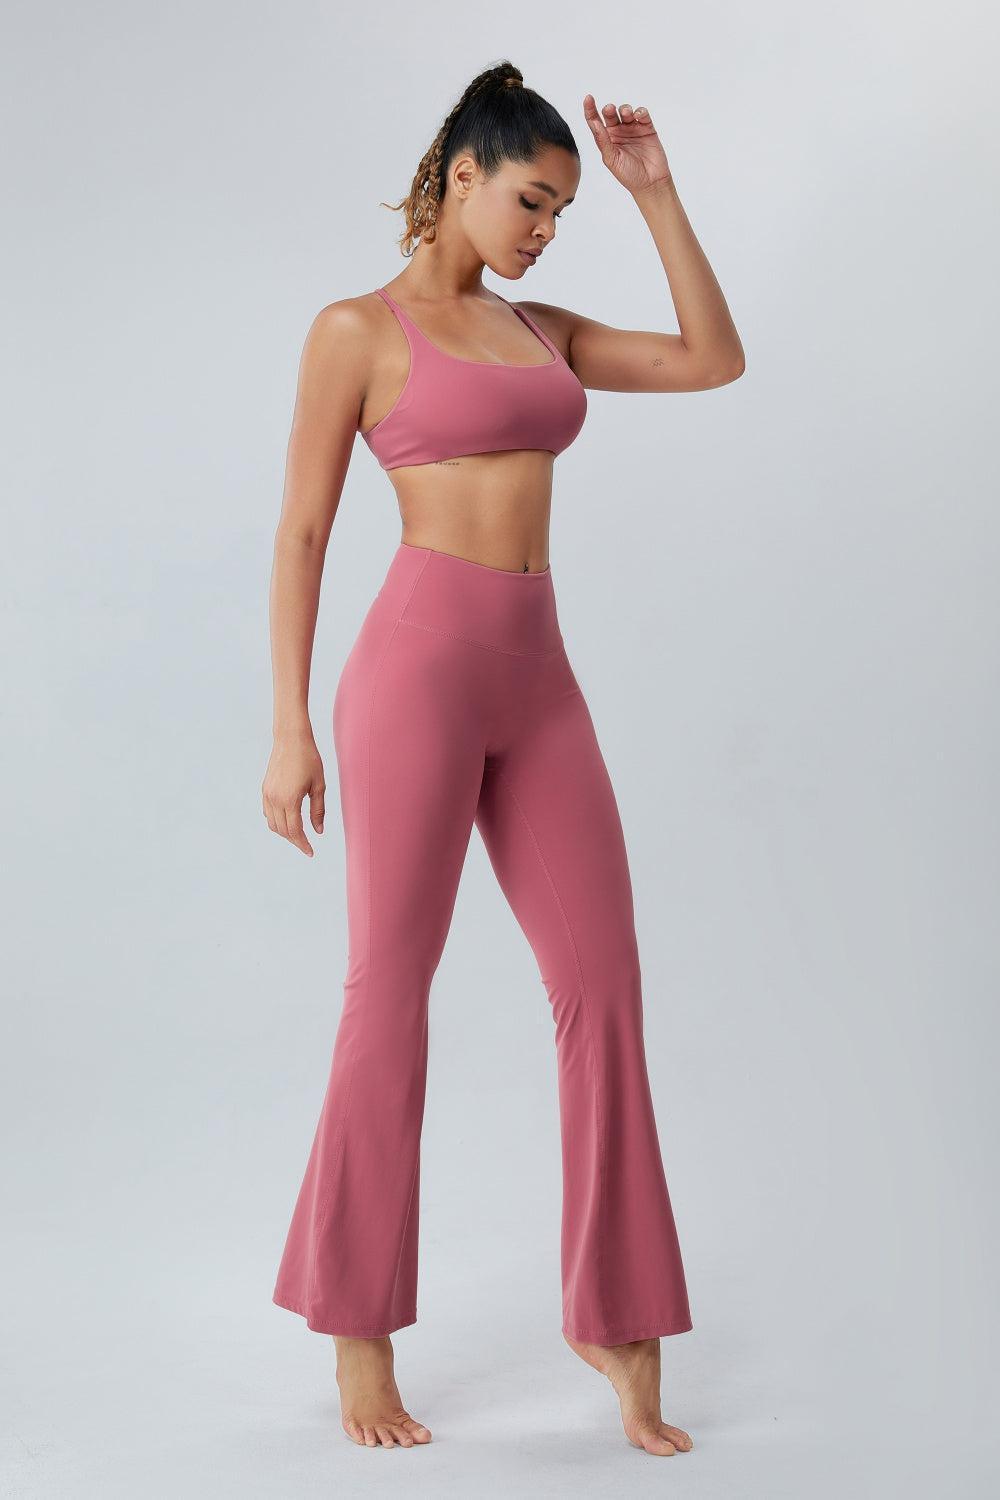 a woman in a pink top and pants